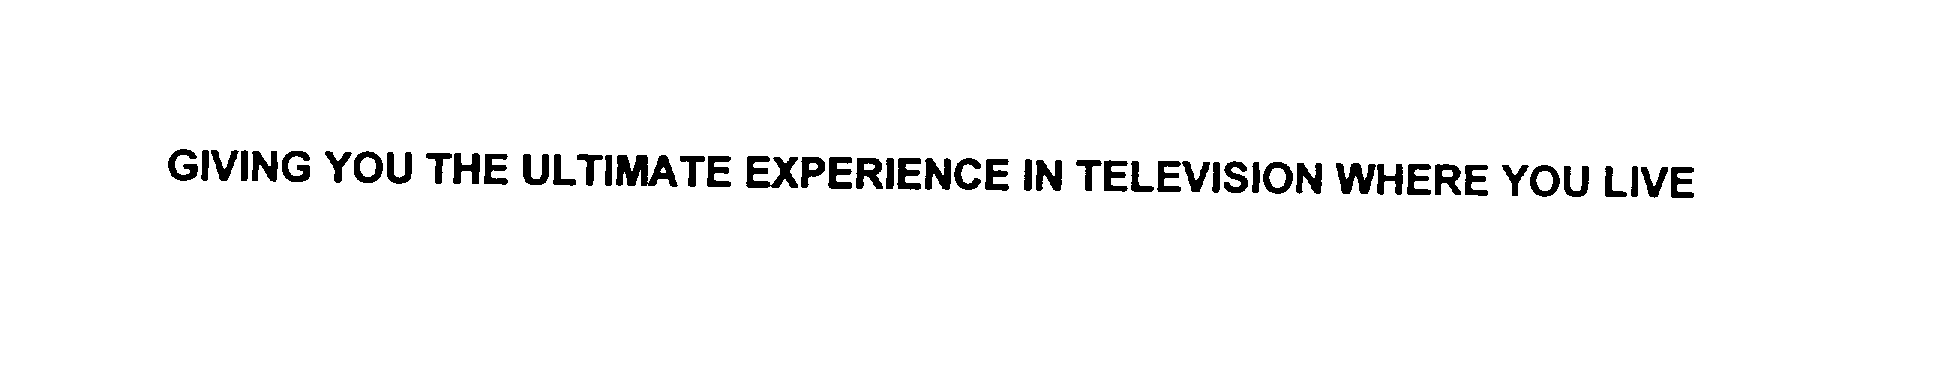  GIVING YOU THE ULTIMATE EXPERIENCE IN TELEVISION WHERE YOU LIVE